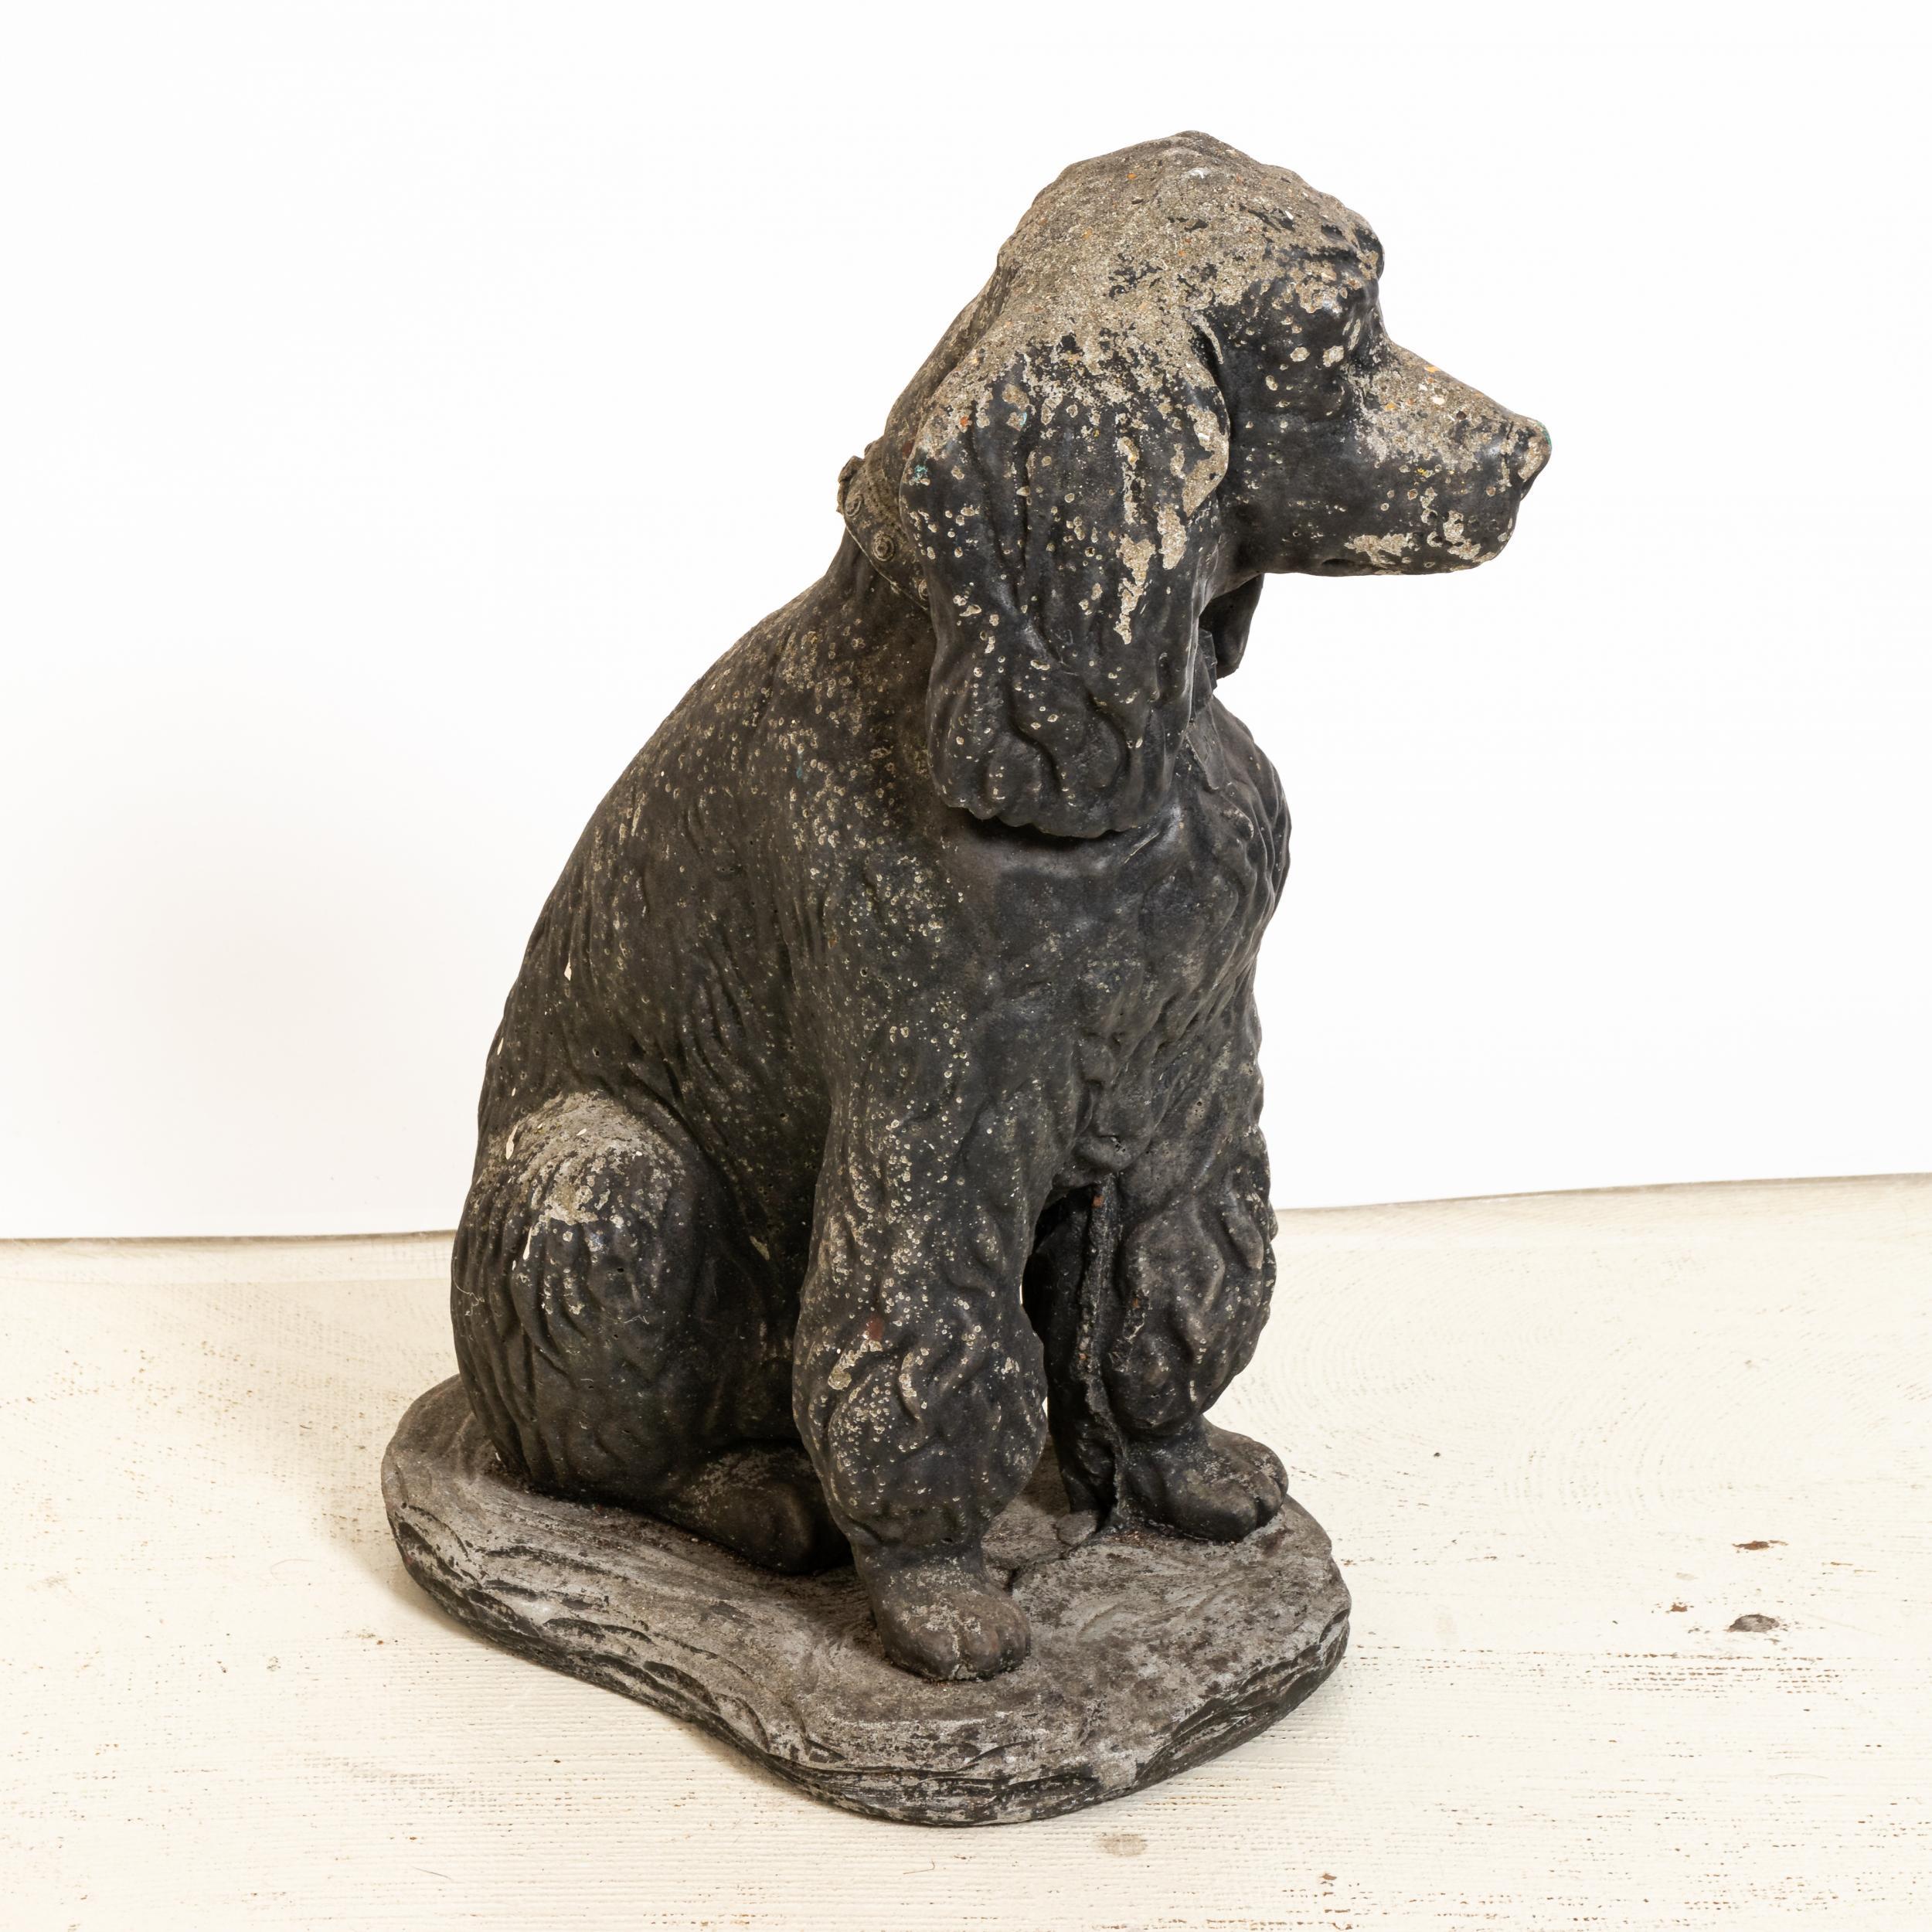 Unique cast stone garden statue in the shape of a seated poodle dog. Made in England in the early 20th century, this charming statue a playful element to add to the landscape. Nice texture at the curly coat of the dog. Good condition, weathered with